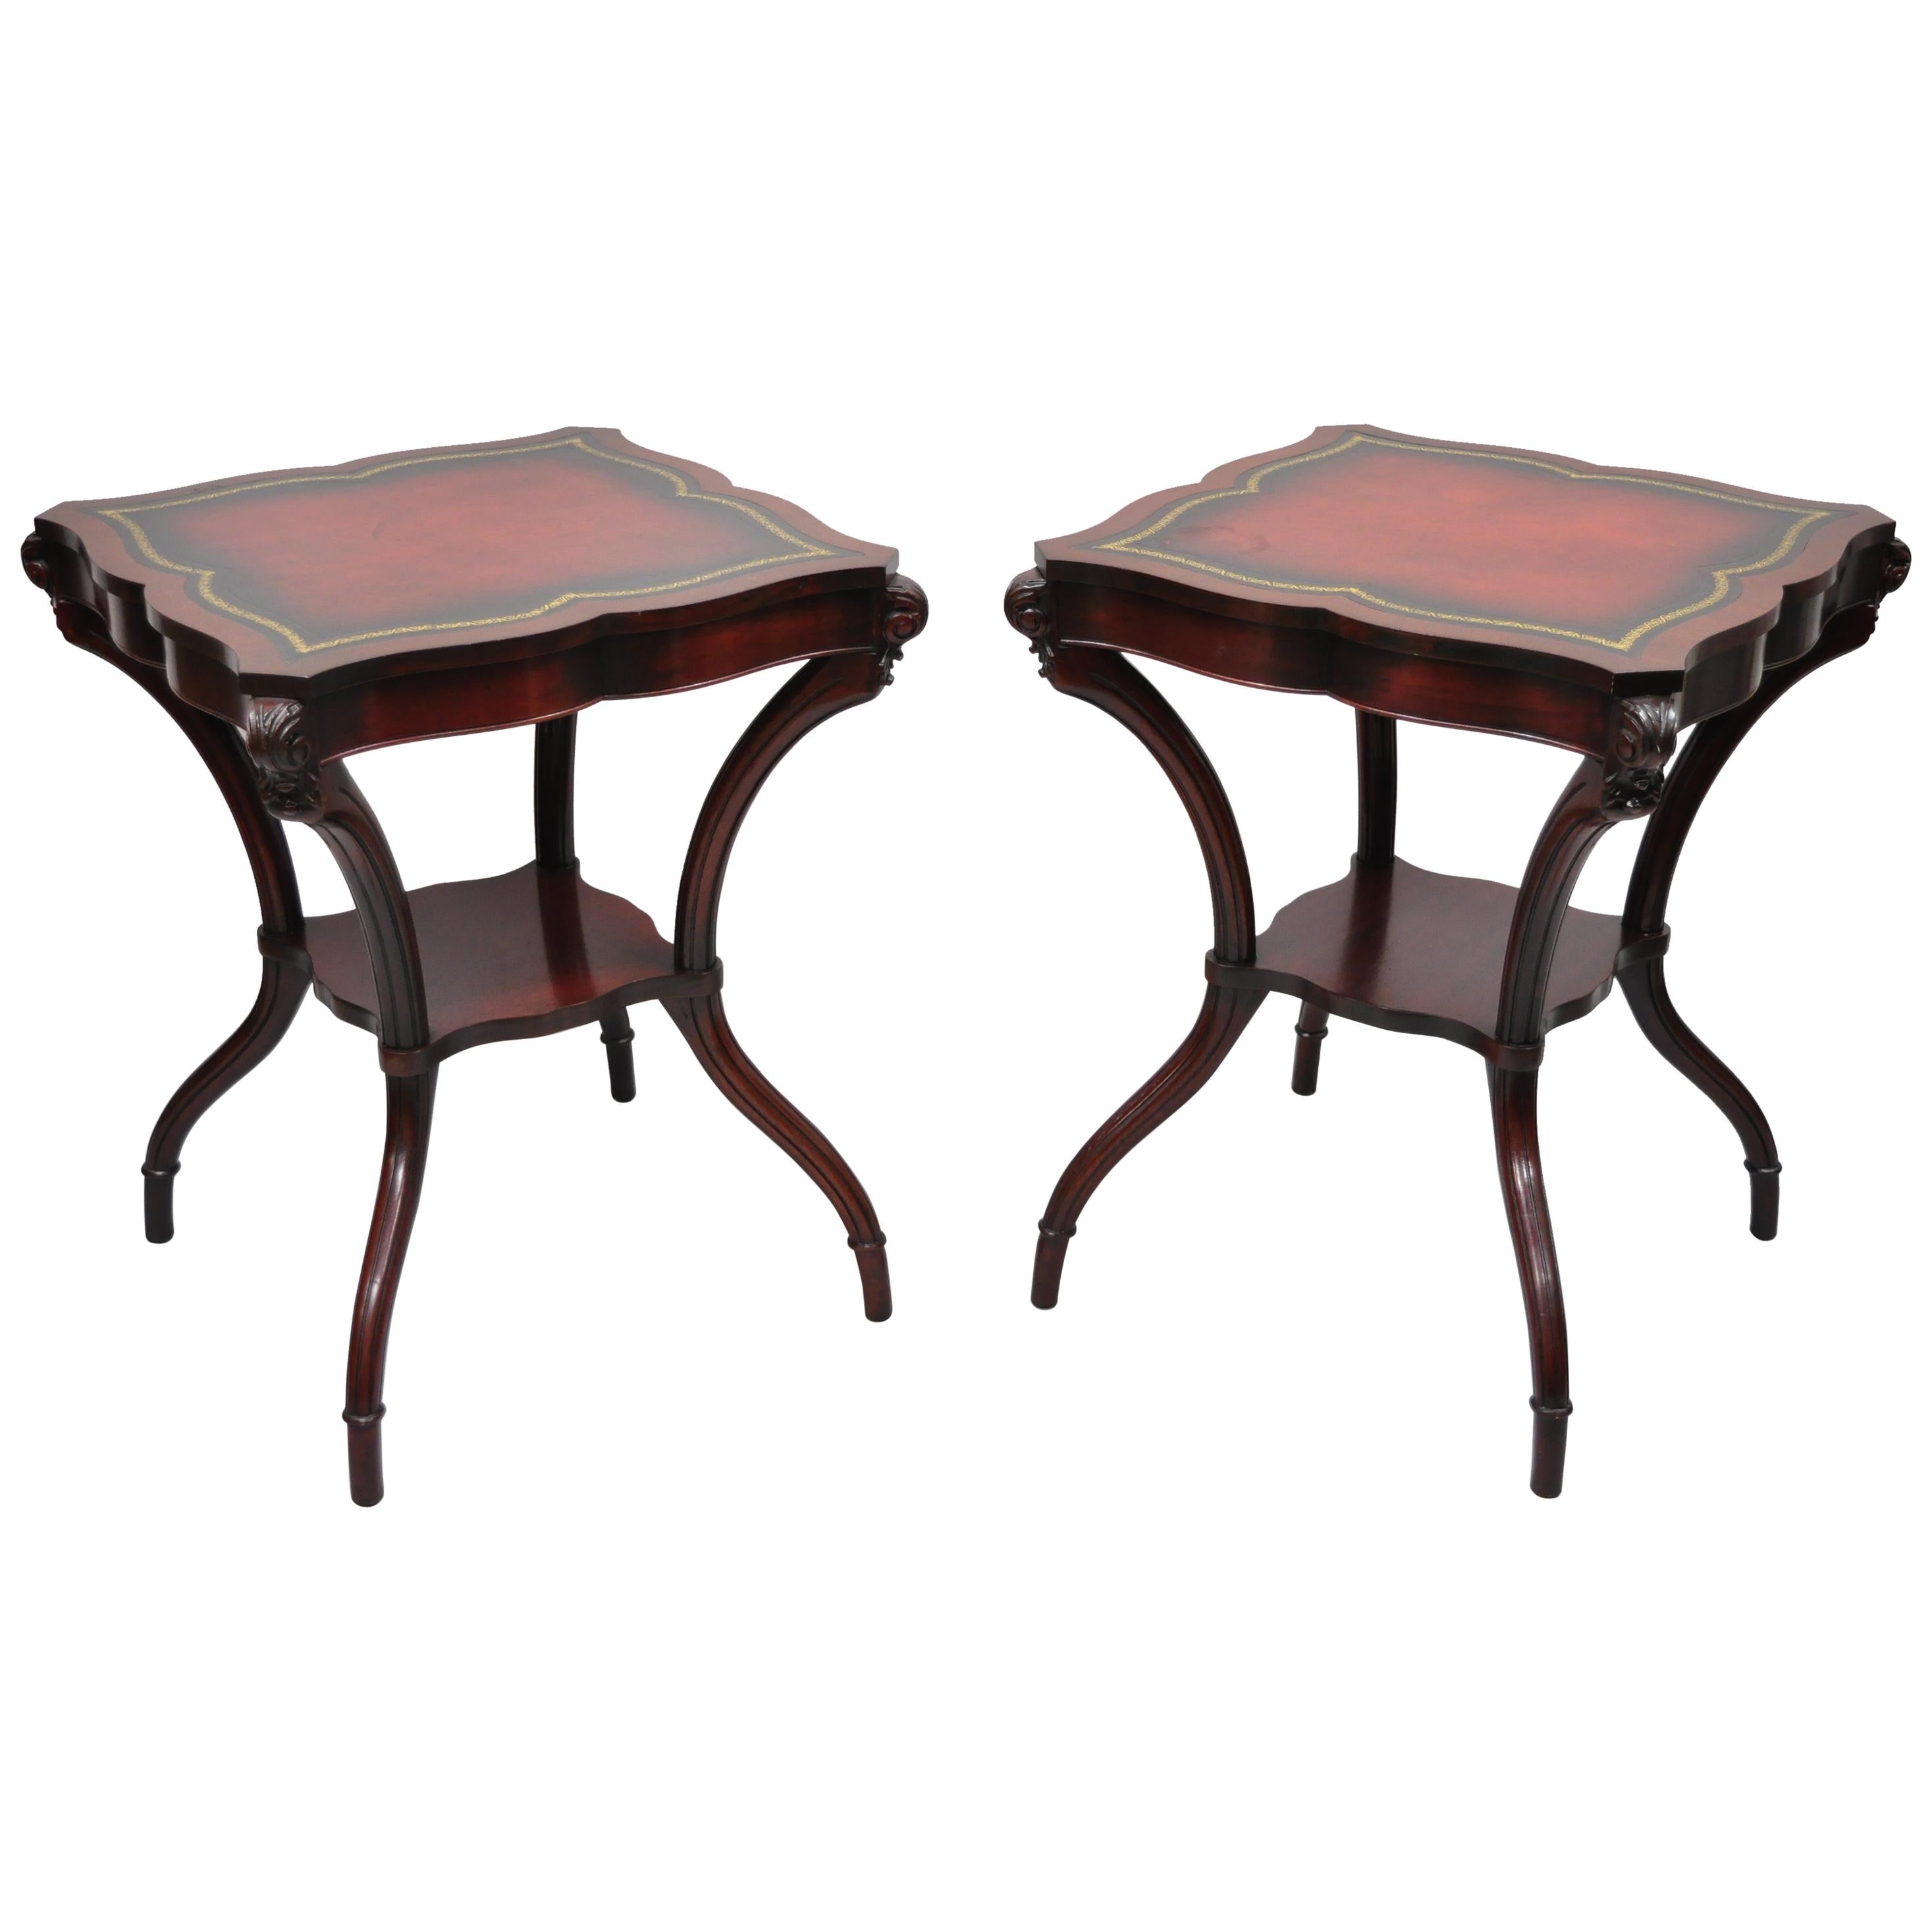 Vintage French Regency Style Red Leather Top Mahogany Lamp End Tables, a Pair